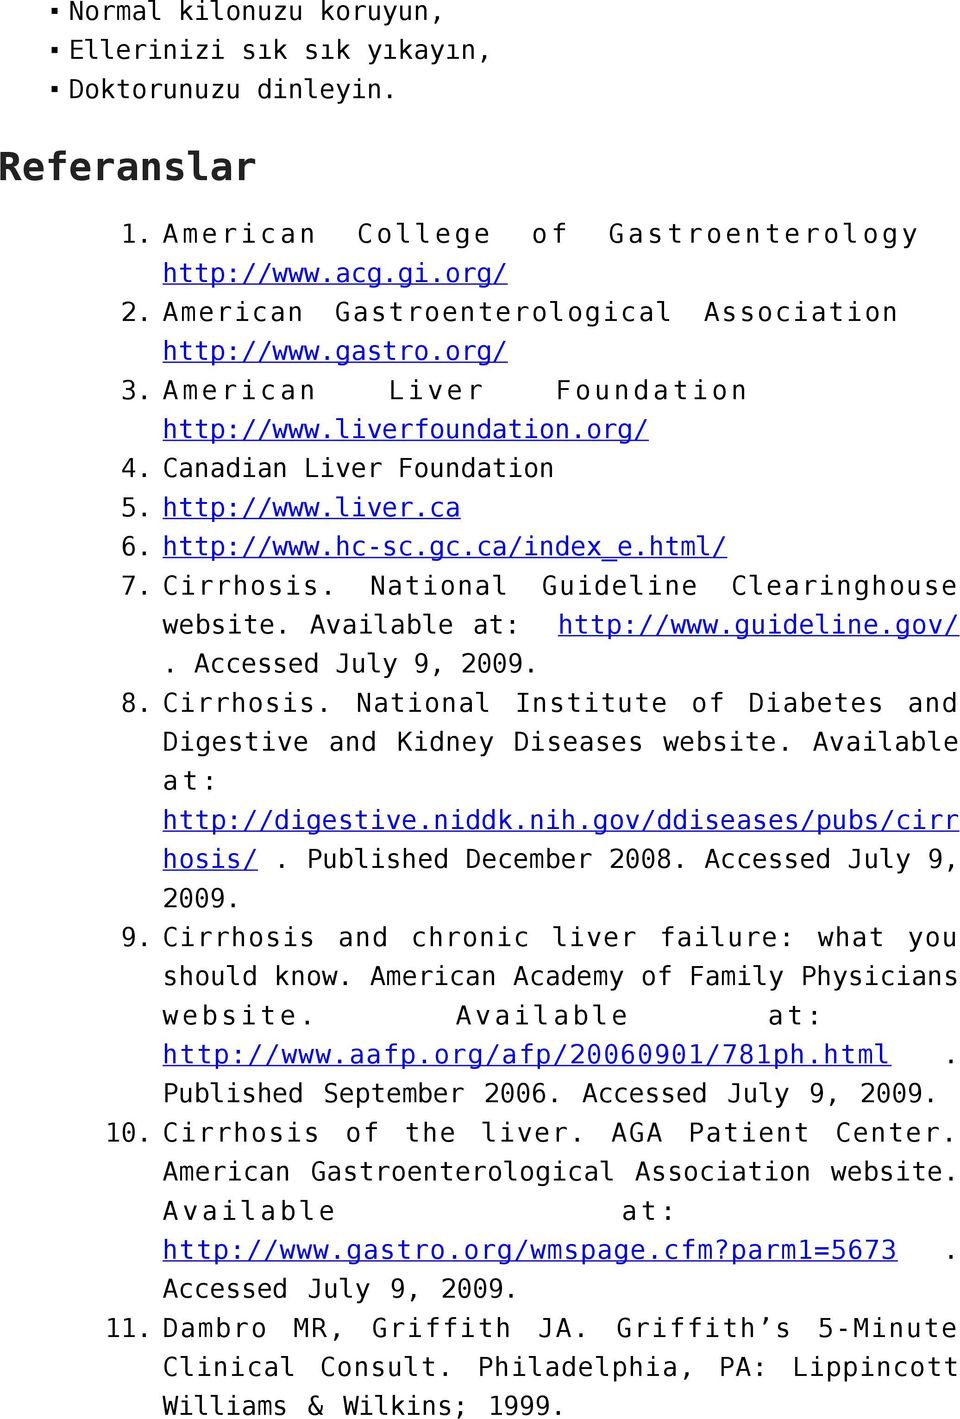 ca/index_e.html/ 7. Cirrhosis. National Guideline Clearinghouse website. Available at: http://www.guideline.gov/. Accessed July 9, 2009. 8. Cirrhosis. National Institute of Diabetes and Digestive and Kidney Diseases website.